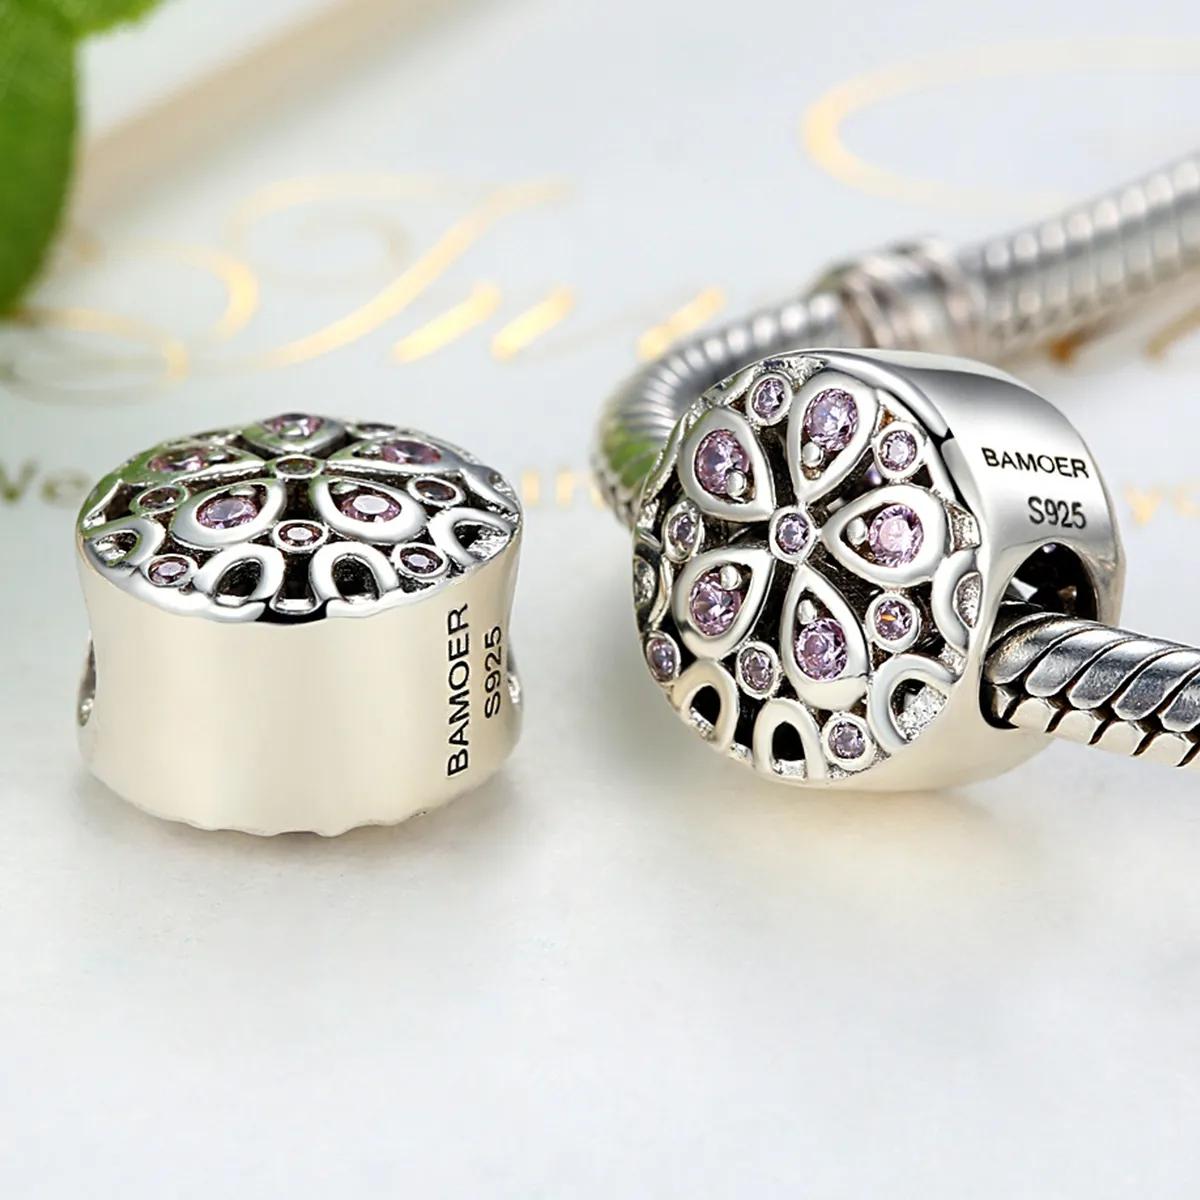 Pandora Style Silver Blooming Charm - SCC053